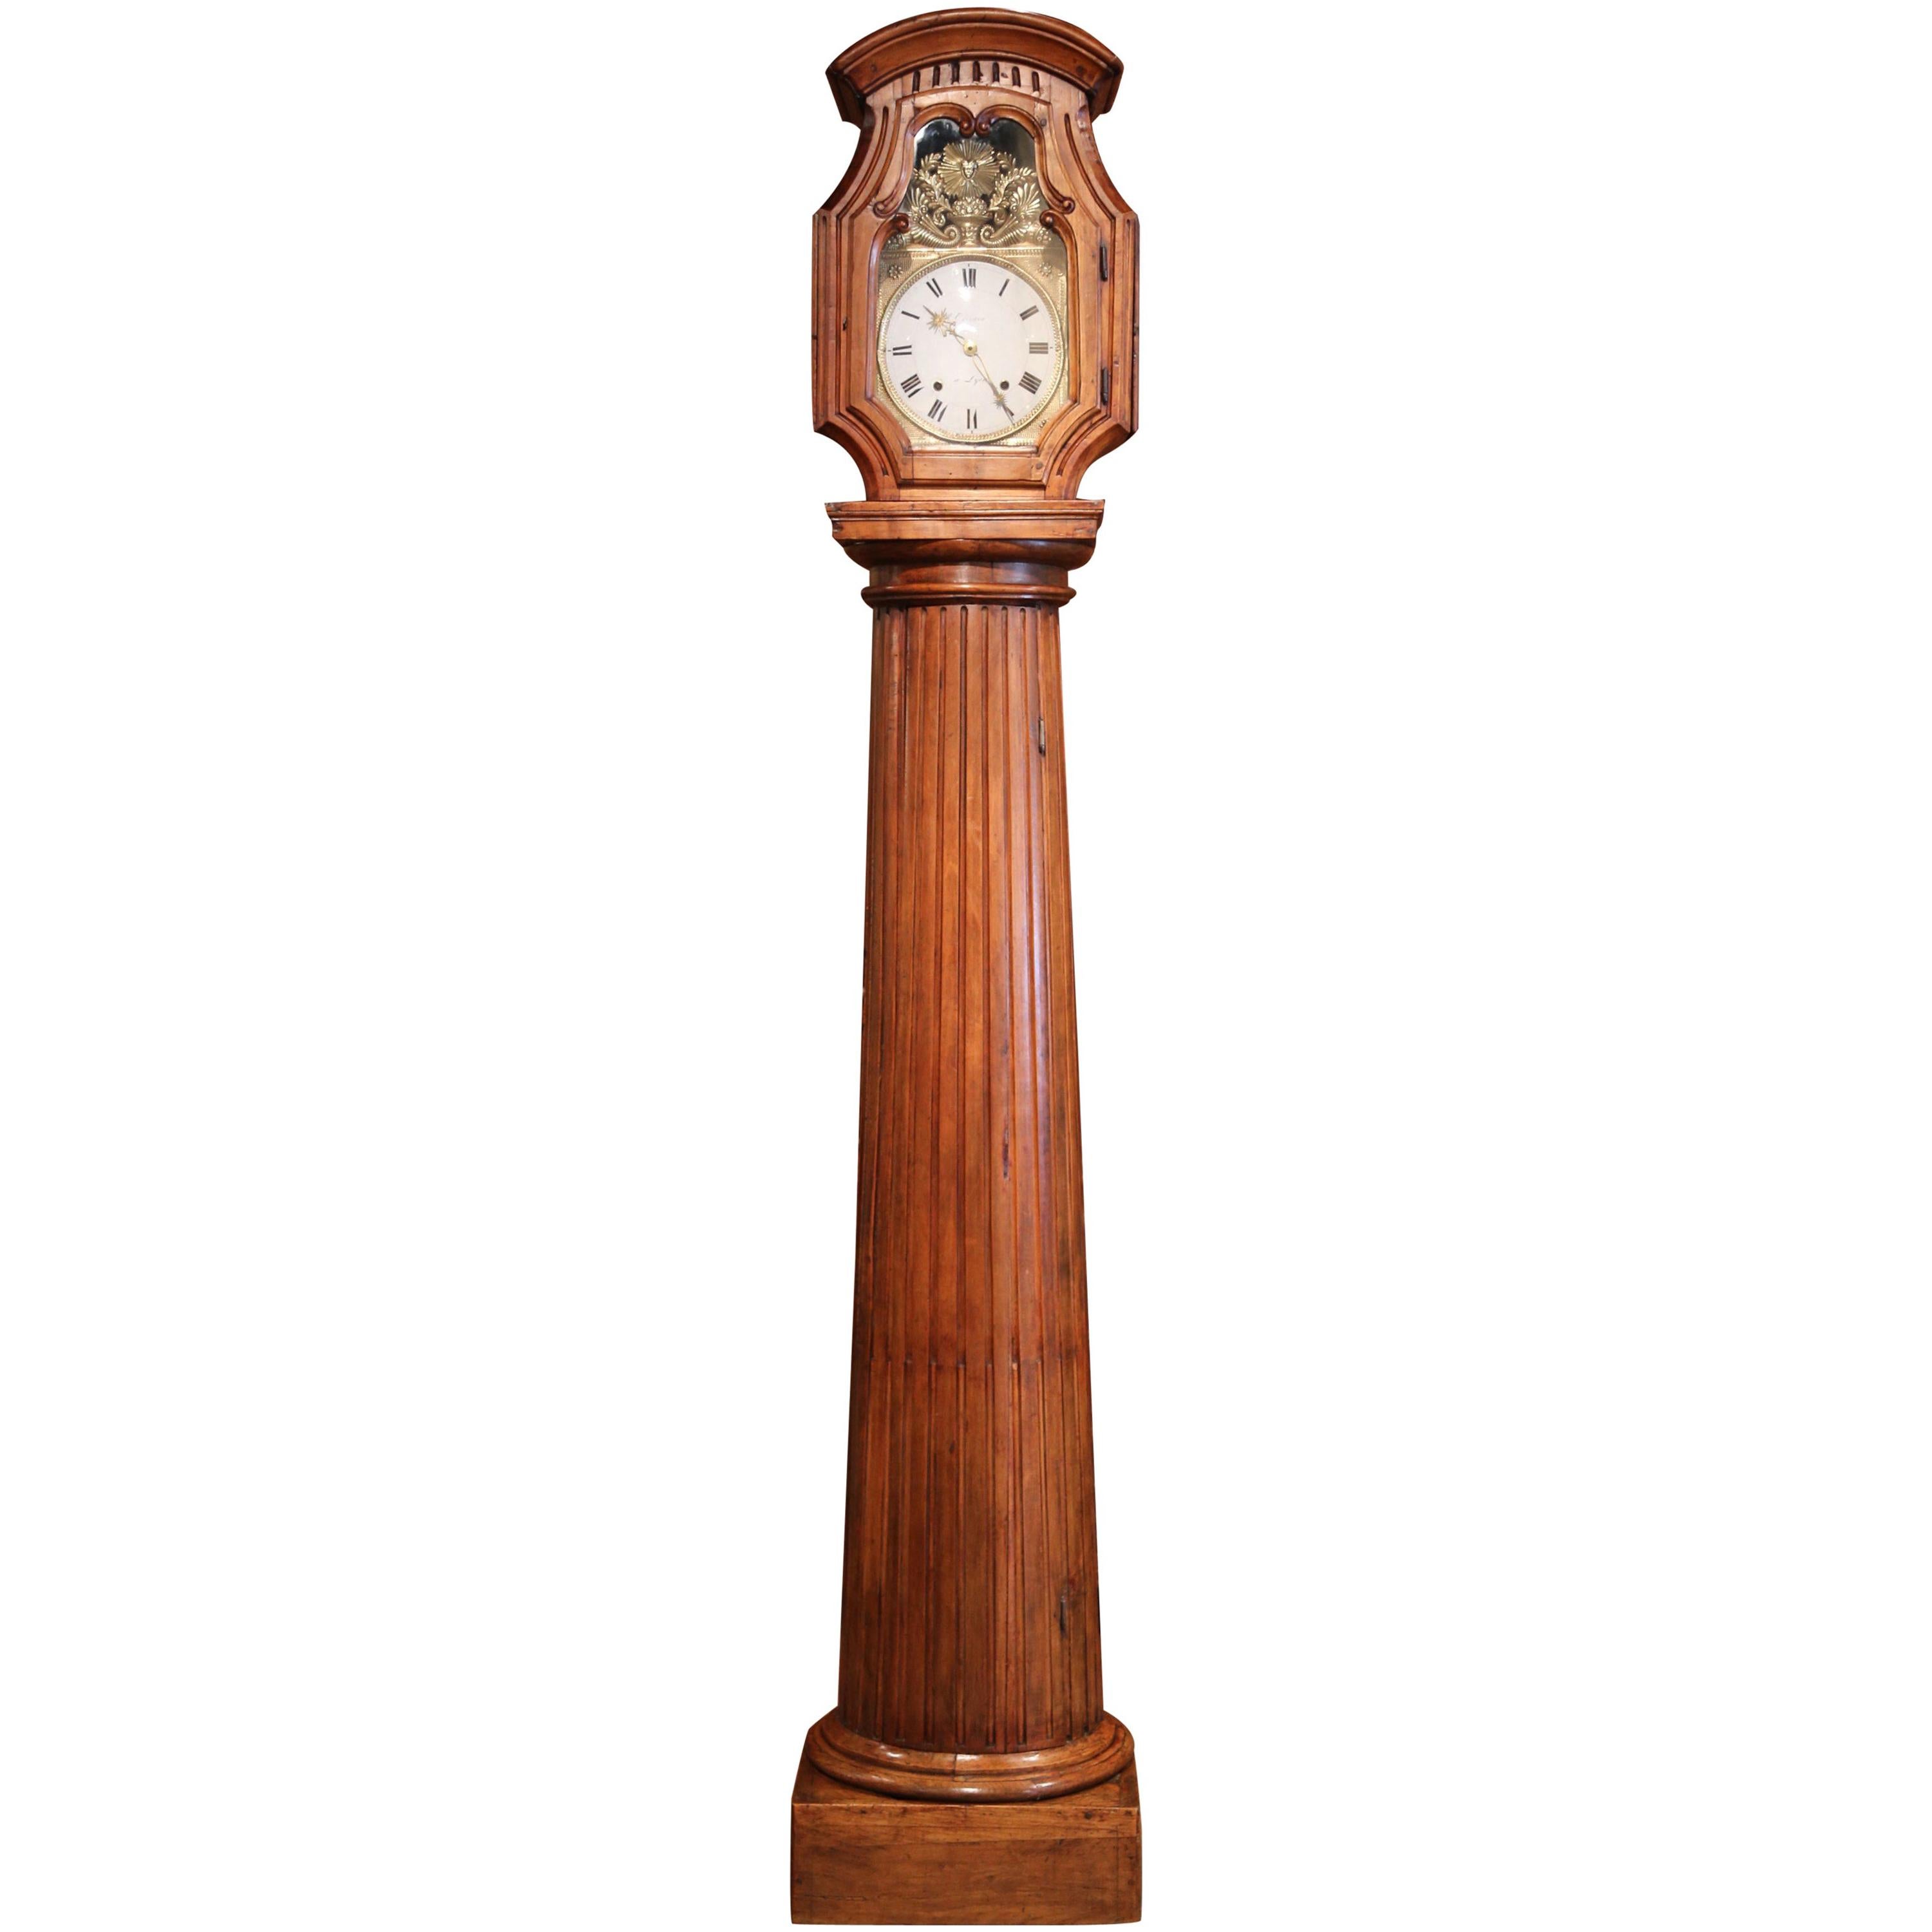 18th Century French Carved Walnut Grandfather Clock from Lyon